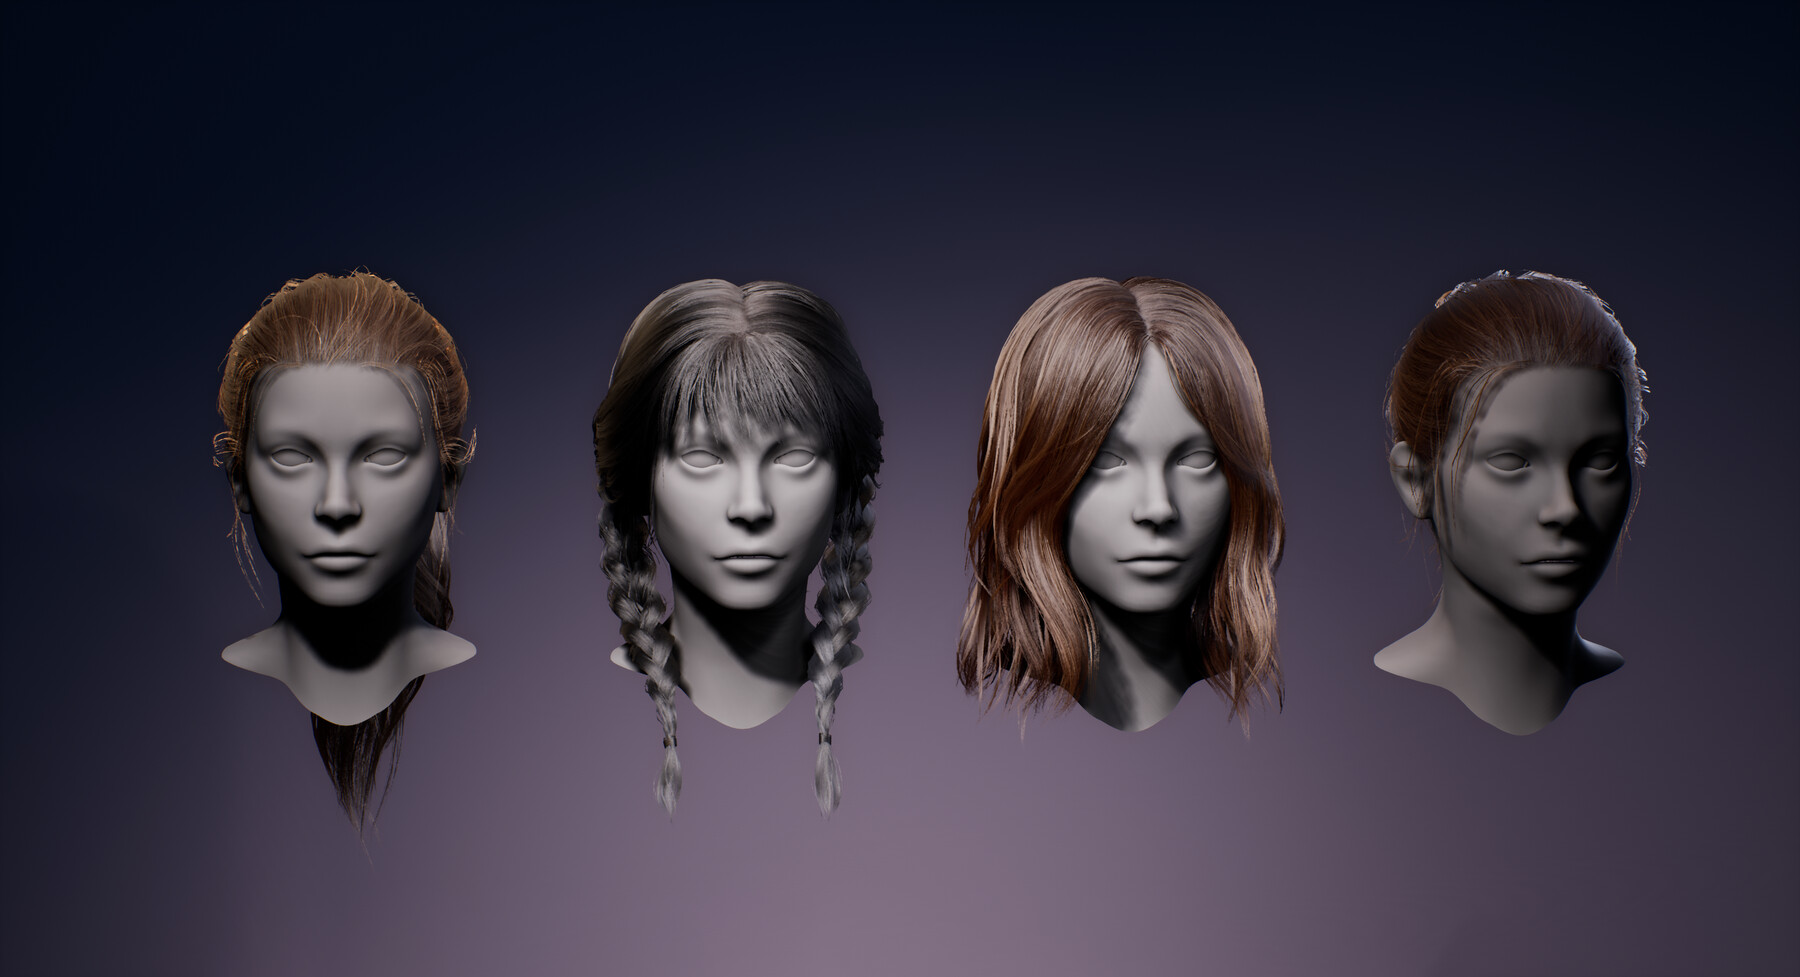 ArtStation - Real-time Women Hairstyles - Standard Pack | Game Assets